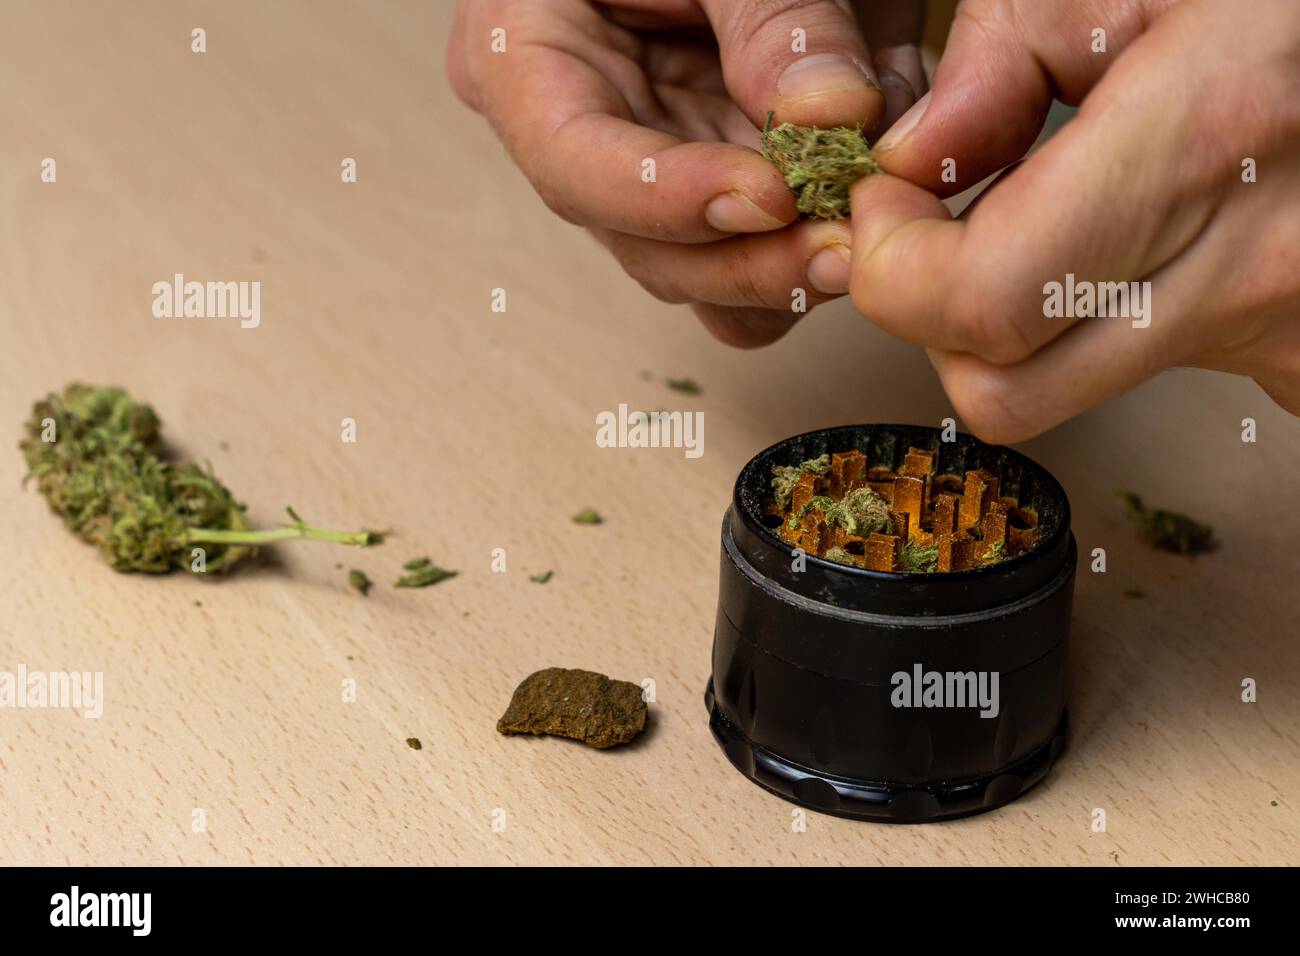 Close up view of hands of unrecognizable person preparing cannabis buds to be put into the grinder Stock Photo